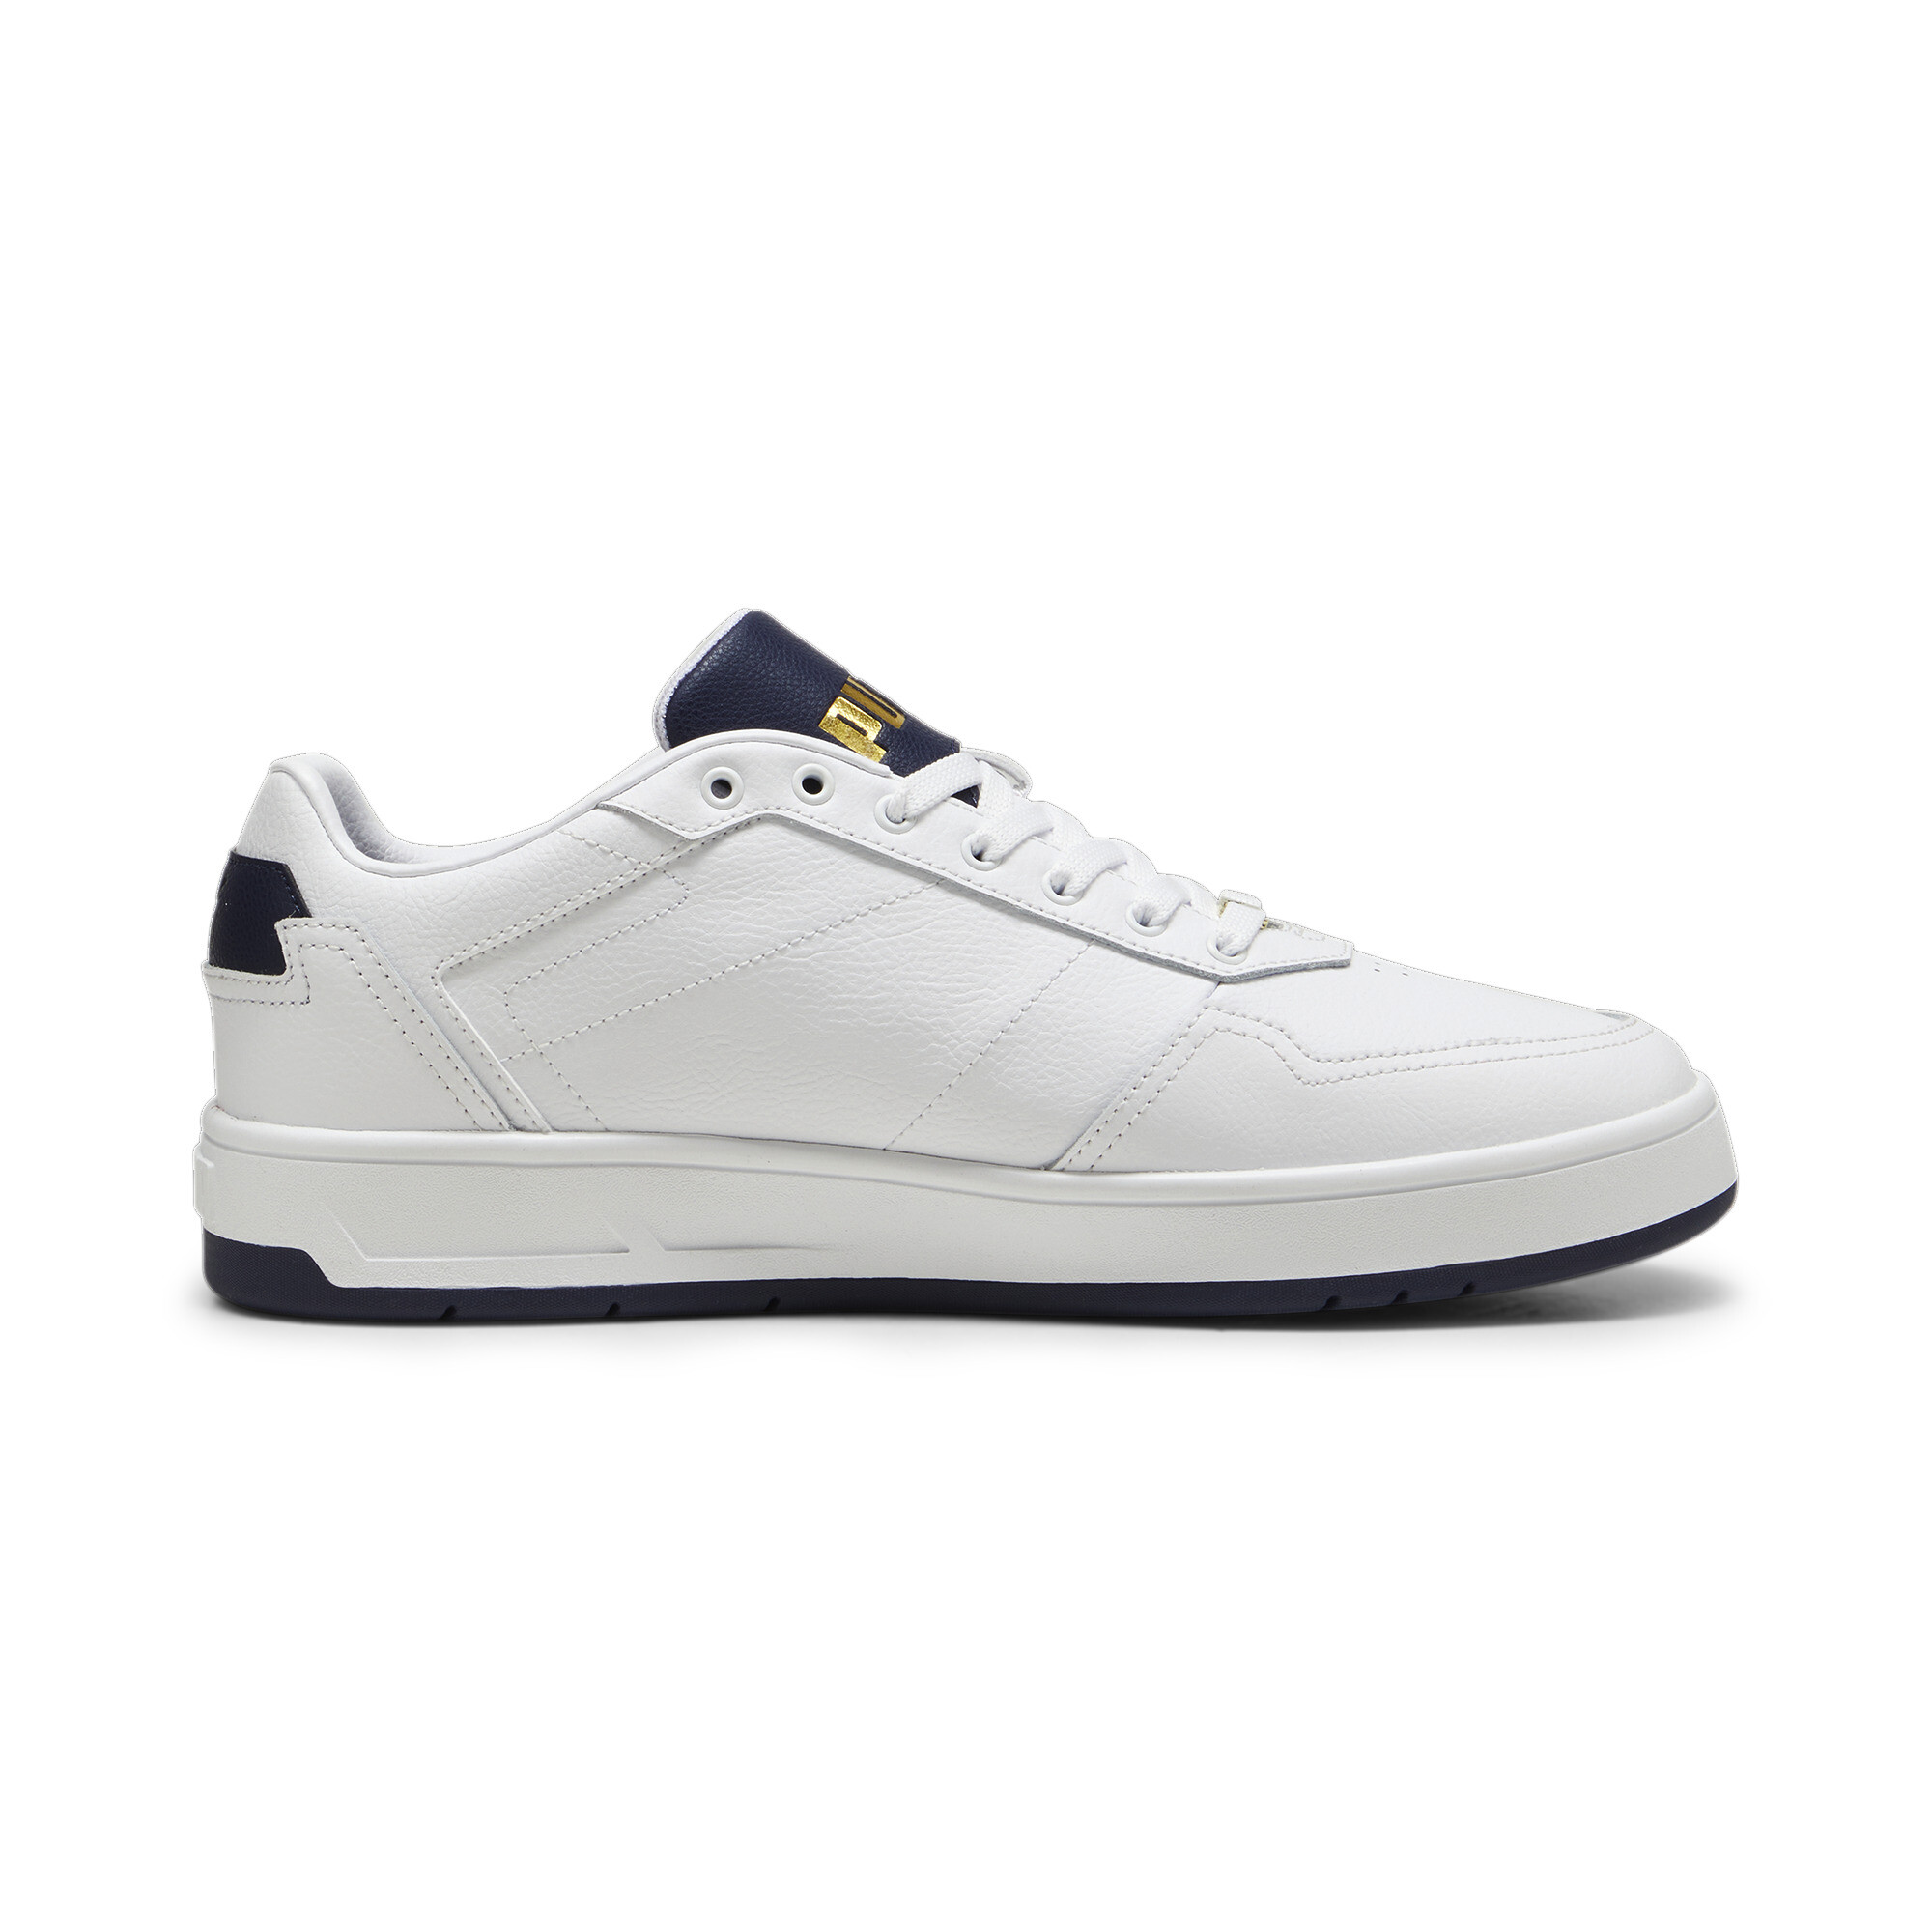 Puma Court Classic Lux Sneakers, White, Size 43, Shoes